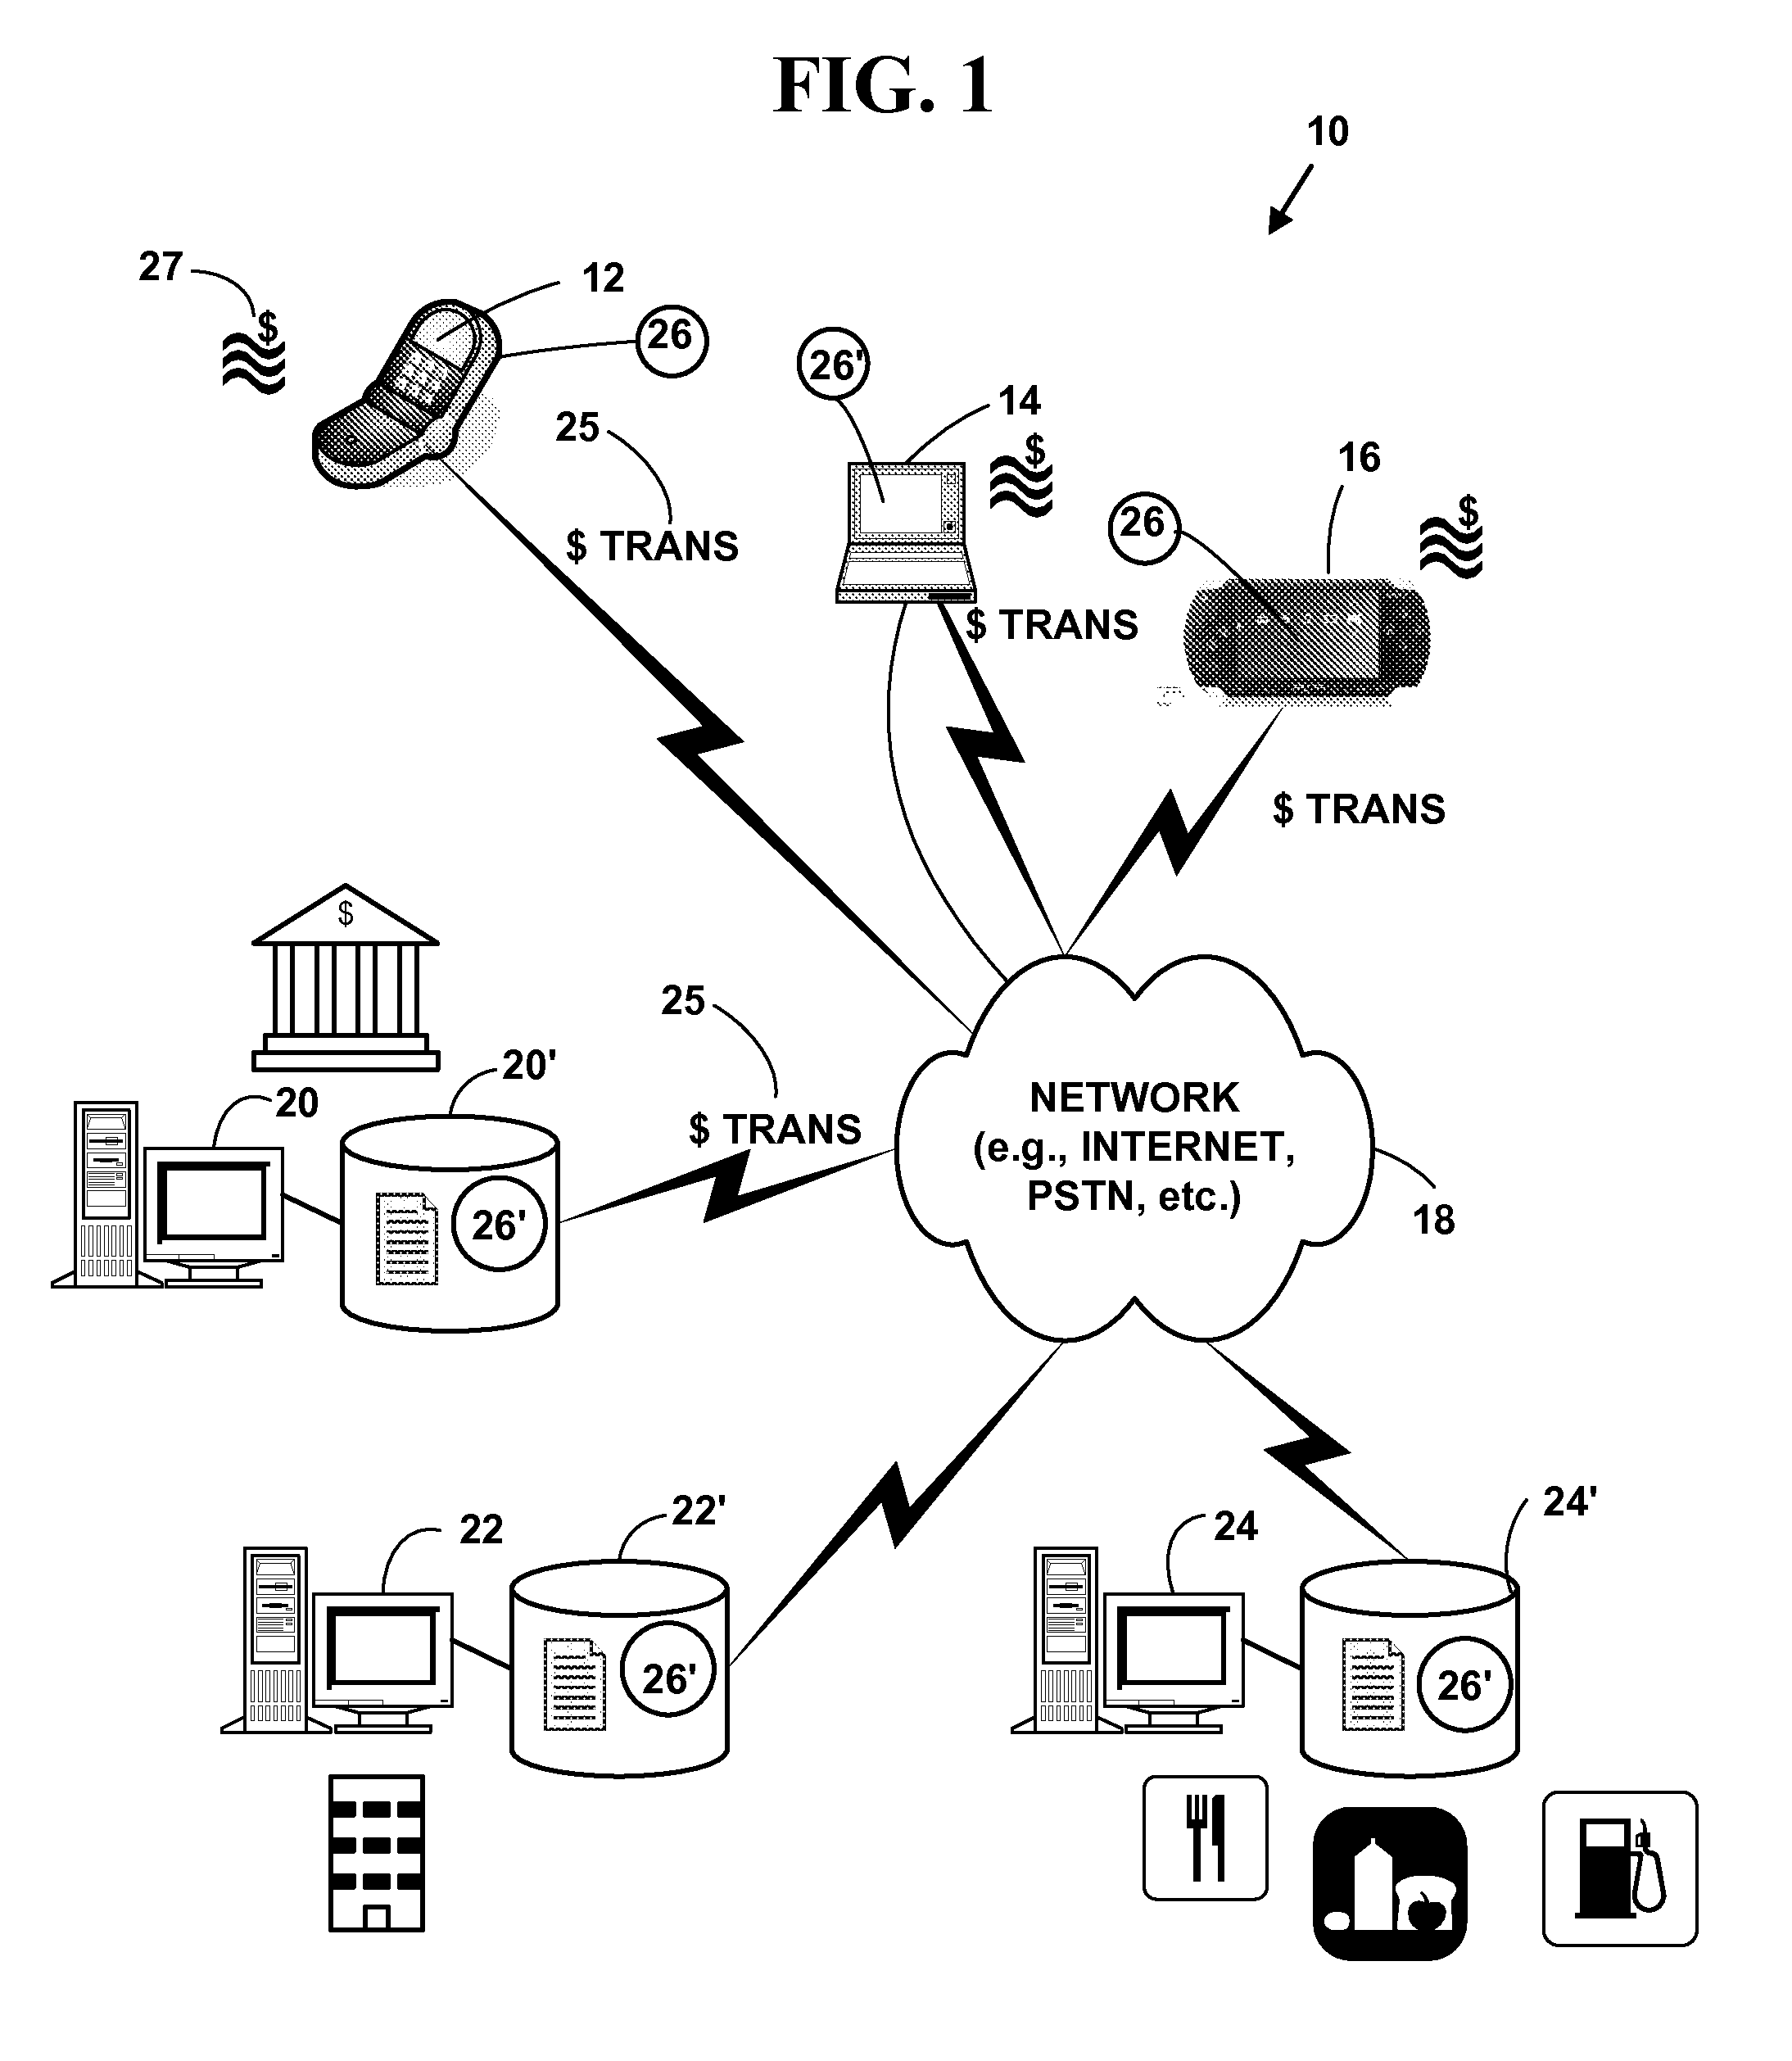 Method and system for mobile banking and mobile payments